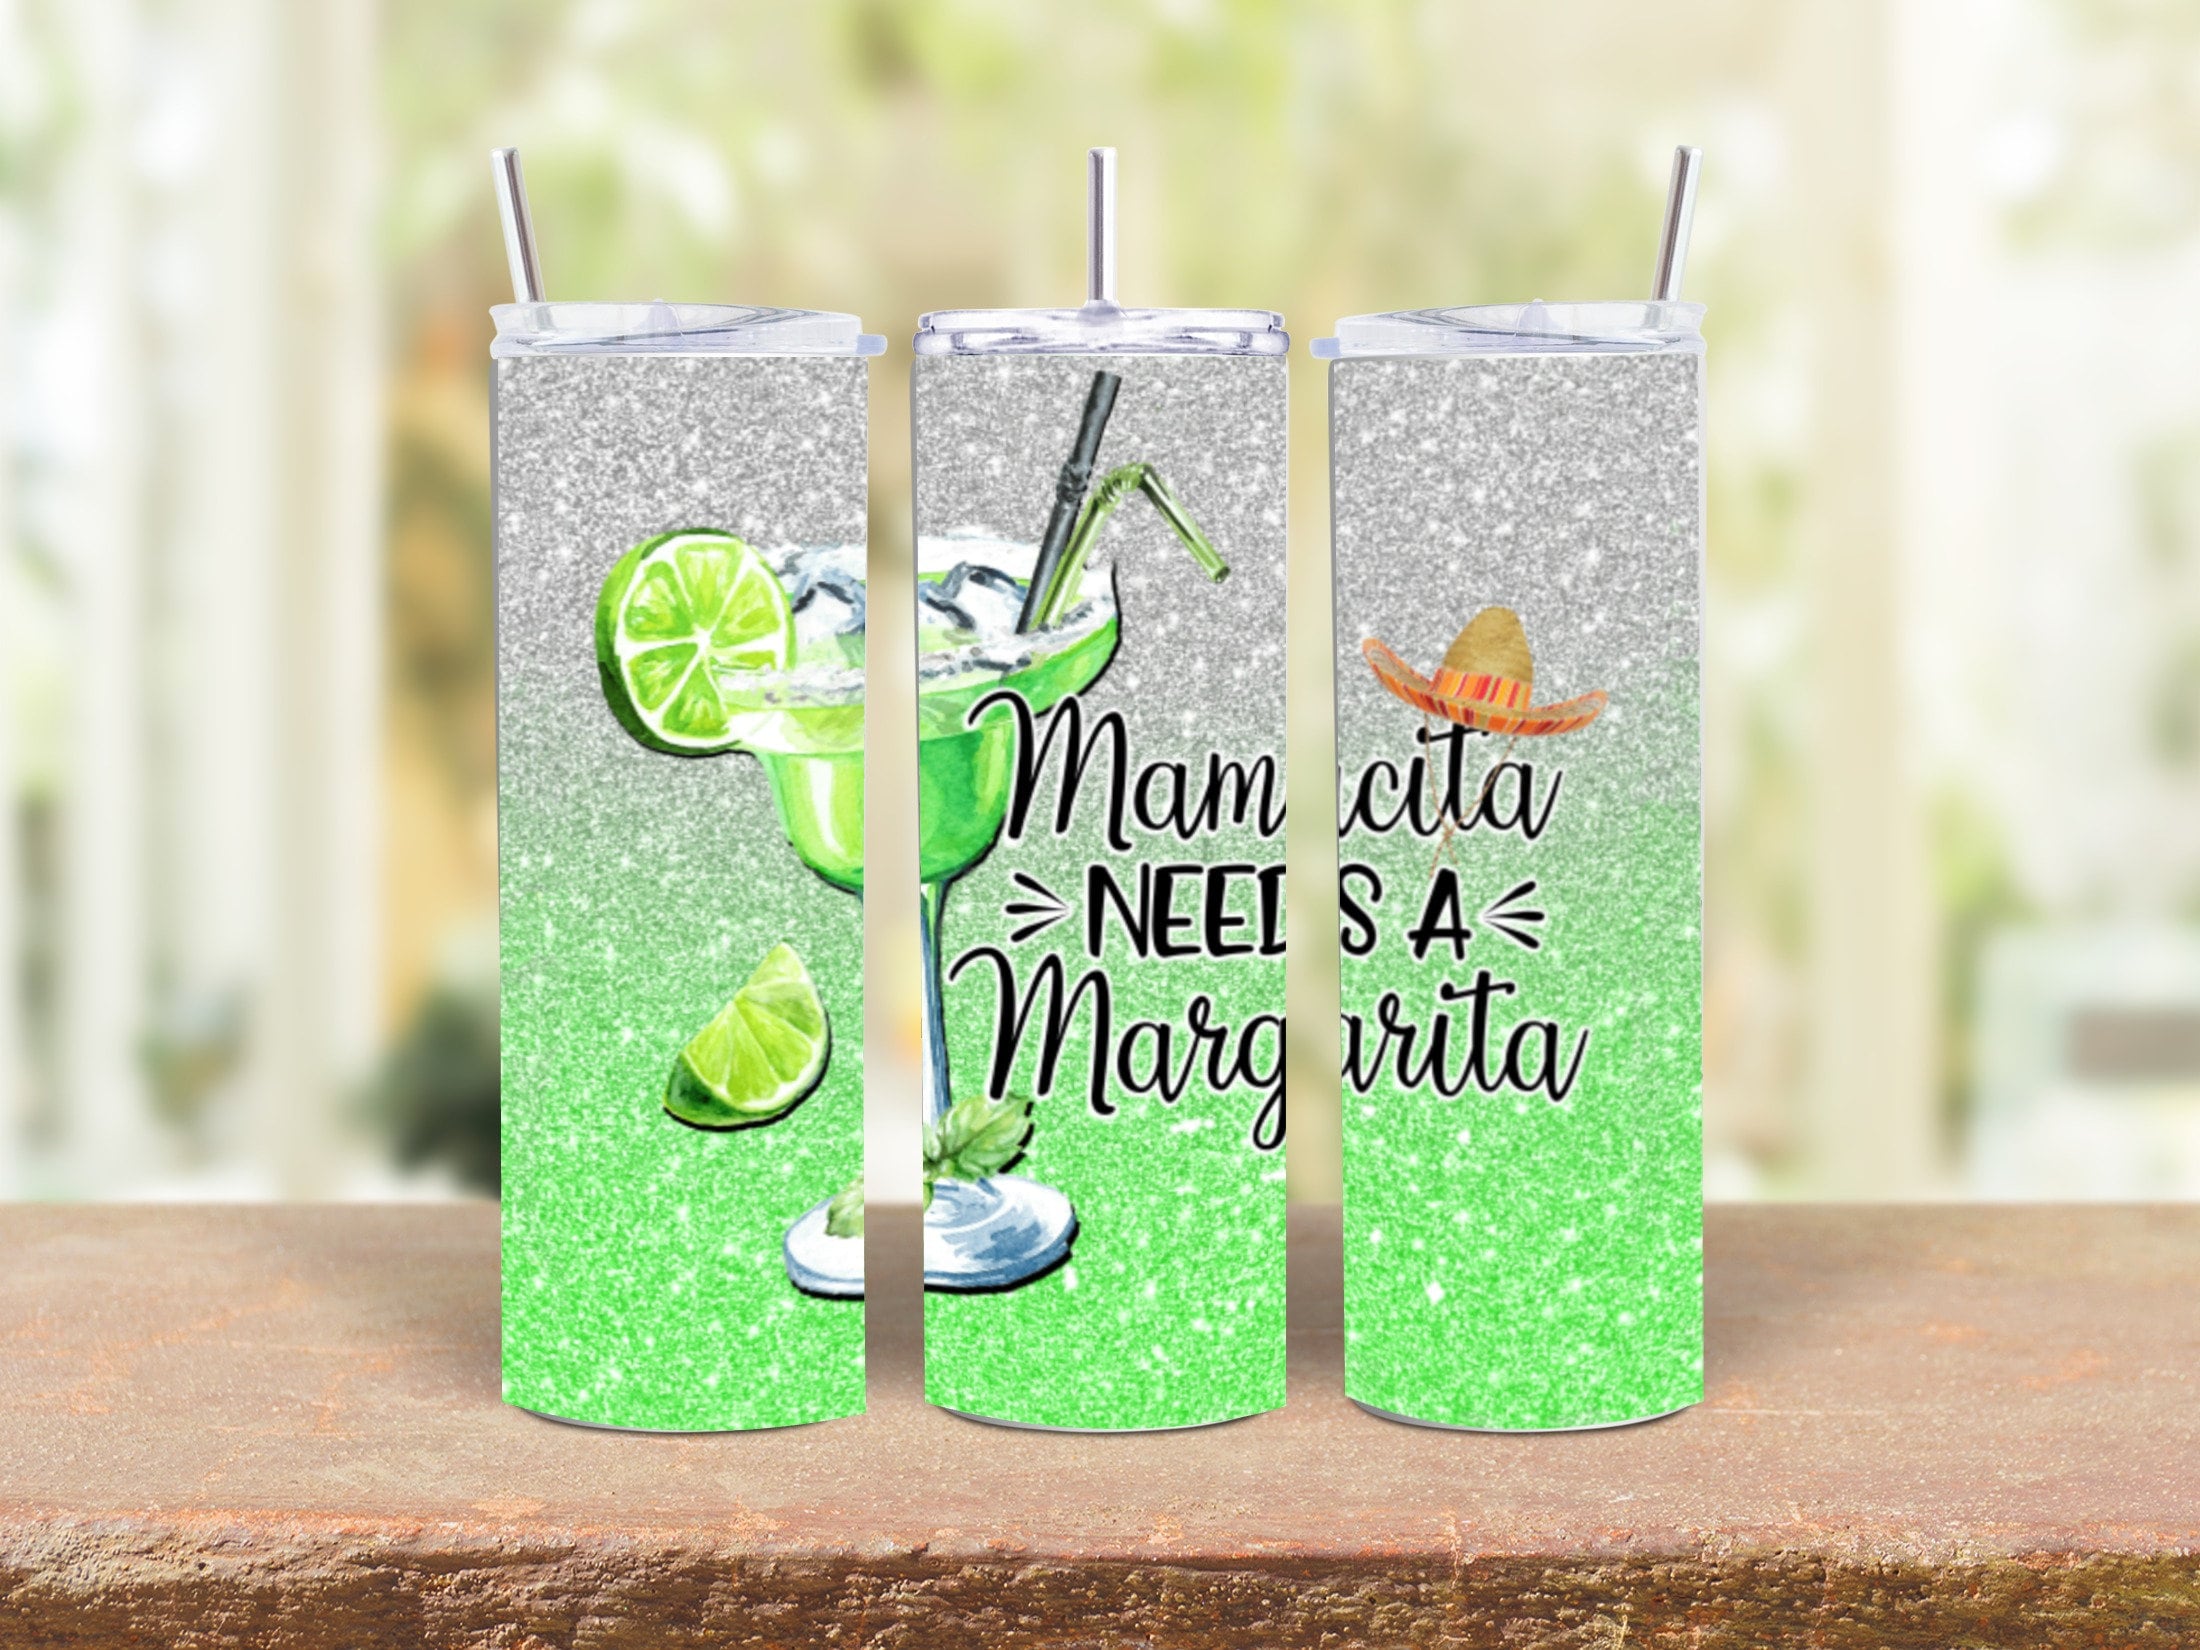 This is Probably a Margarita Laser Etched Metal Tumbler/Metal Travel  Cup/Stainless Steel Coffee Mug/Travel To-Go Tumbler/Insulated Tumbler